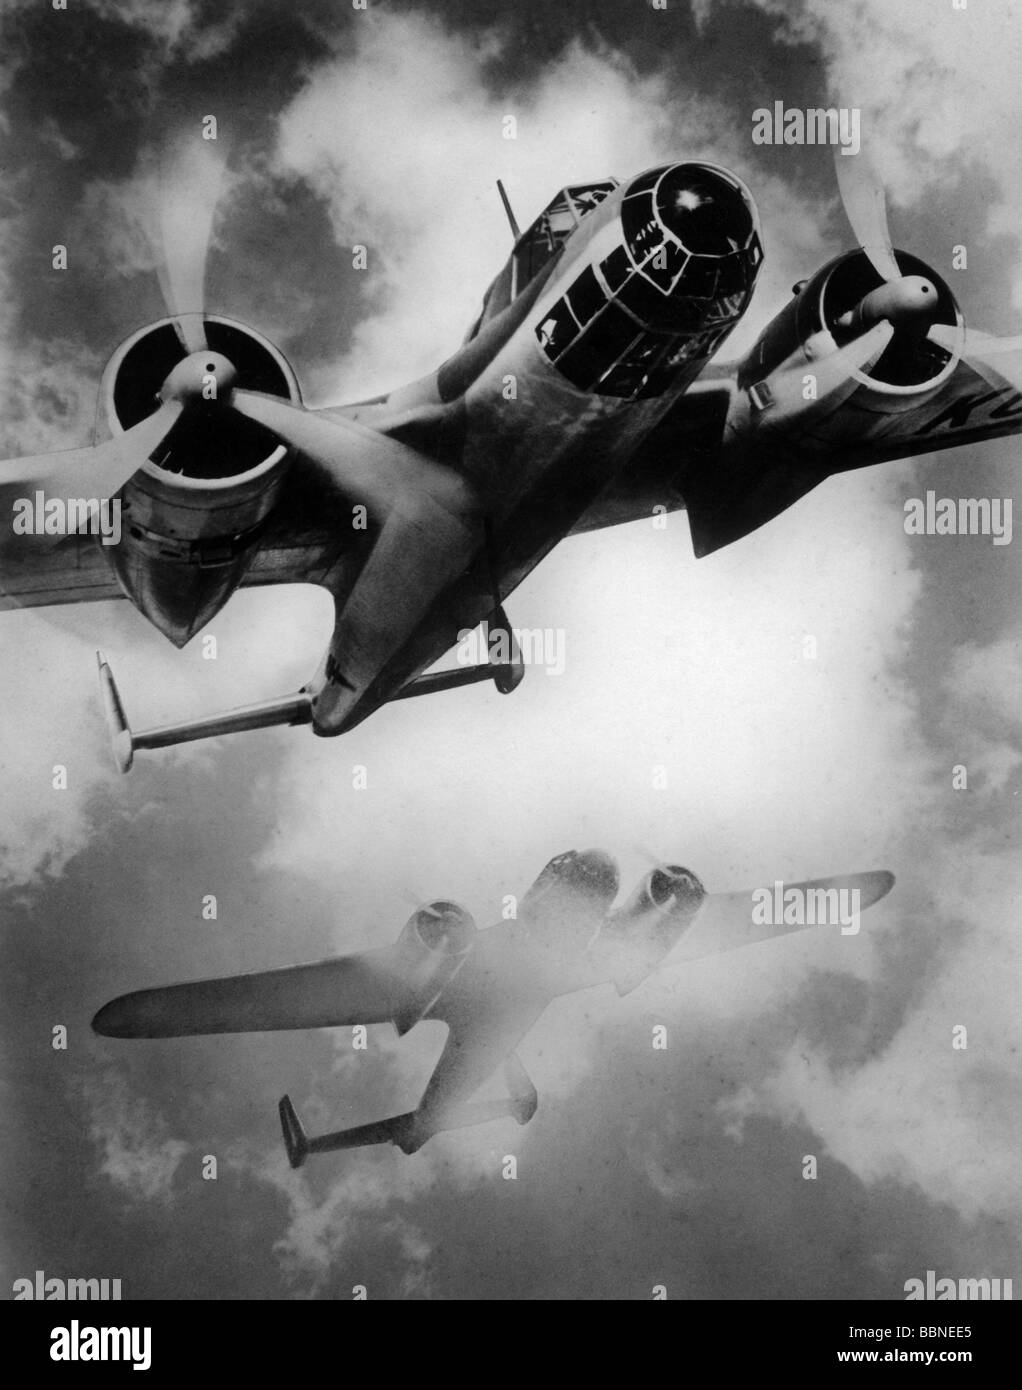 events, Second World War / WWII, aerial warfare, aircraft, German bombers Dornier Do 17 in flight, photo postcard, Germany, circa 1939, Do-17, Do17, bomber, flying, 20th century, historic, historical, Luftwaffe, Wehrmacht, Germany, Third Reich, plane, planes, clouds, postcards, 1930s, Stock Photo